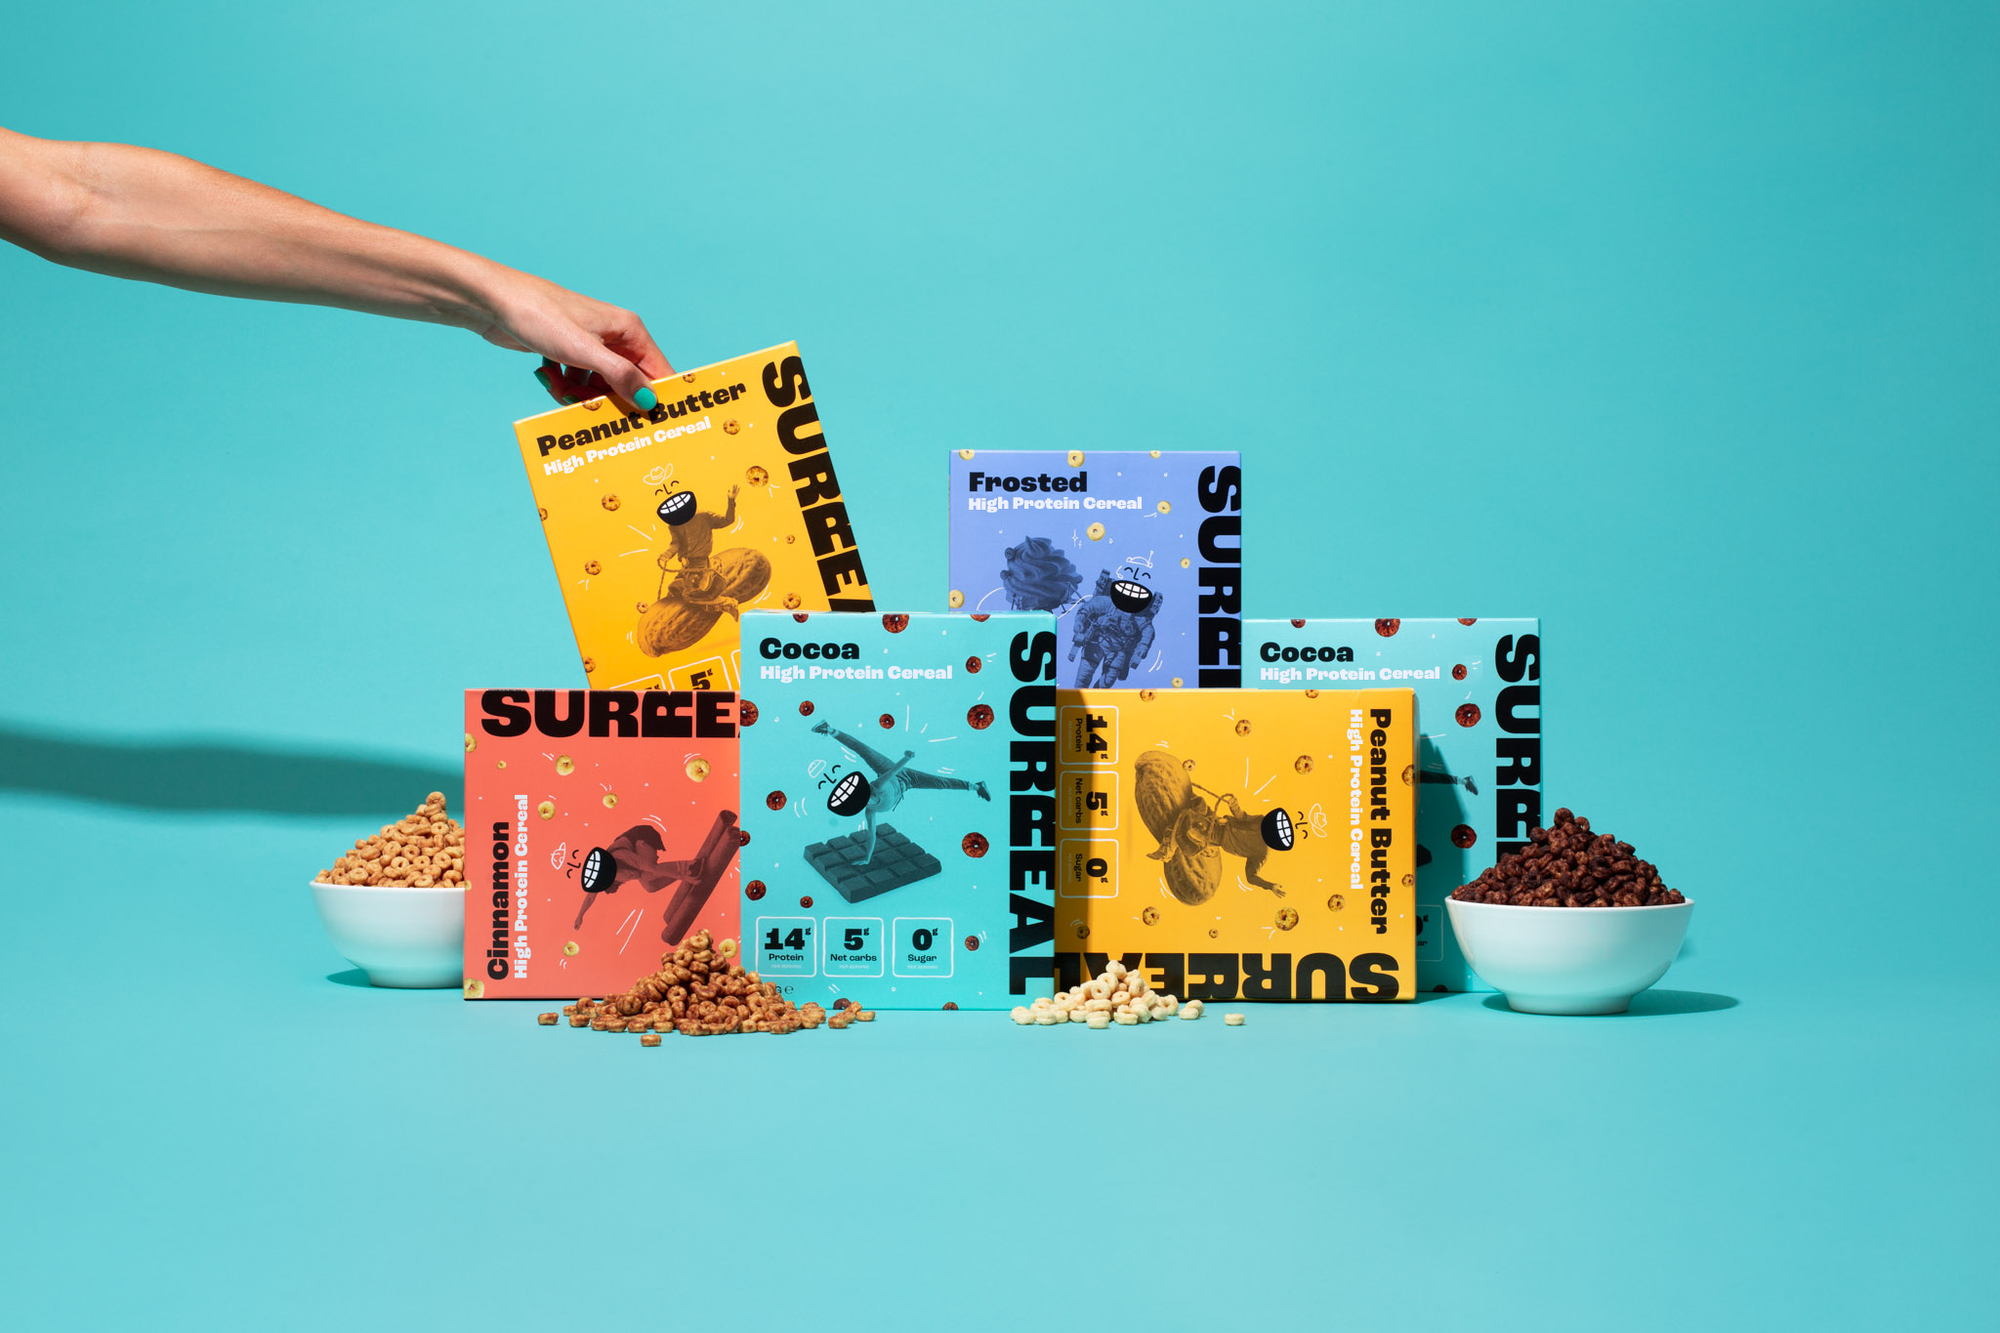 Surreal: branding that stirs up breakfast